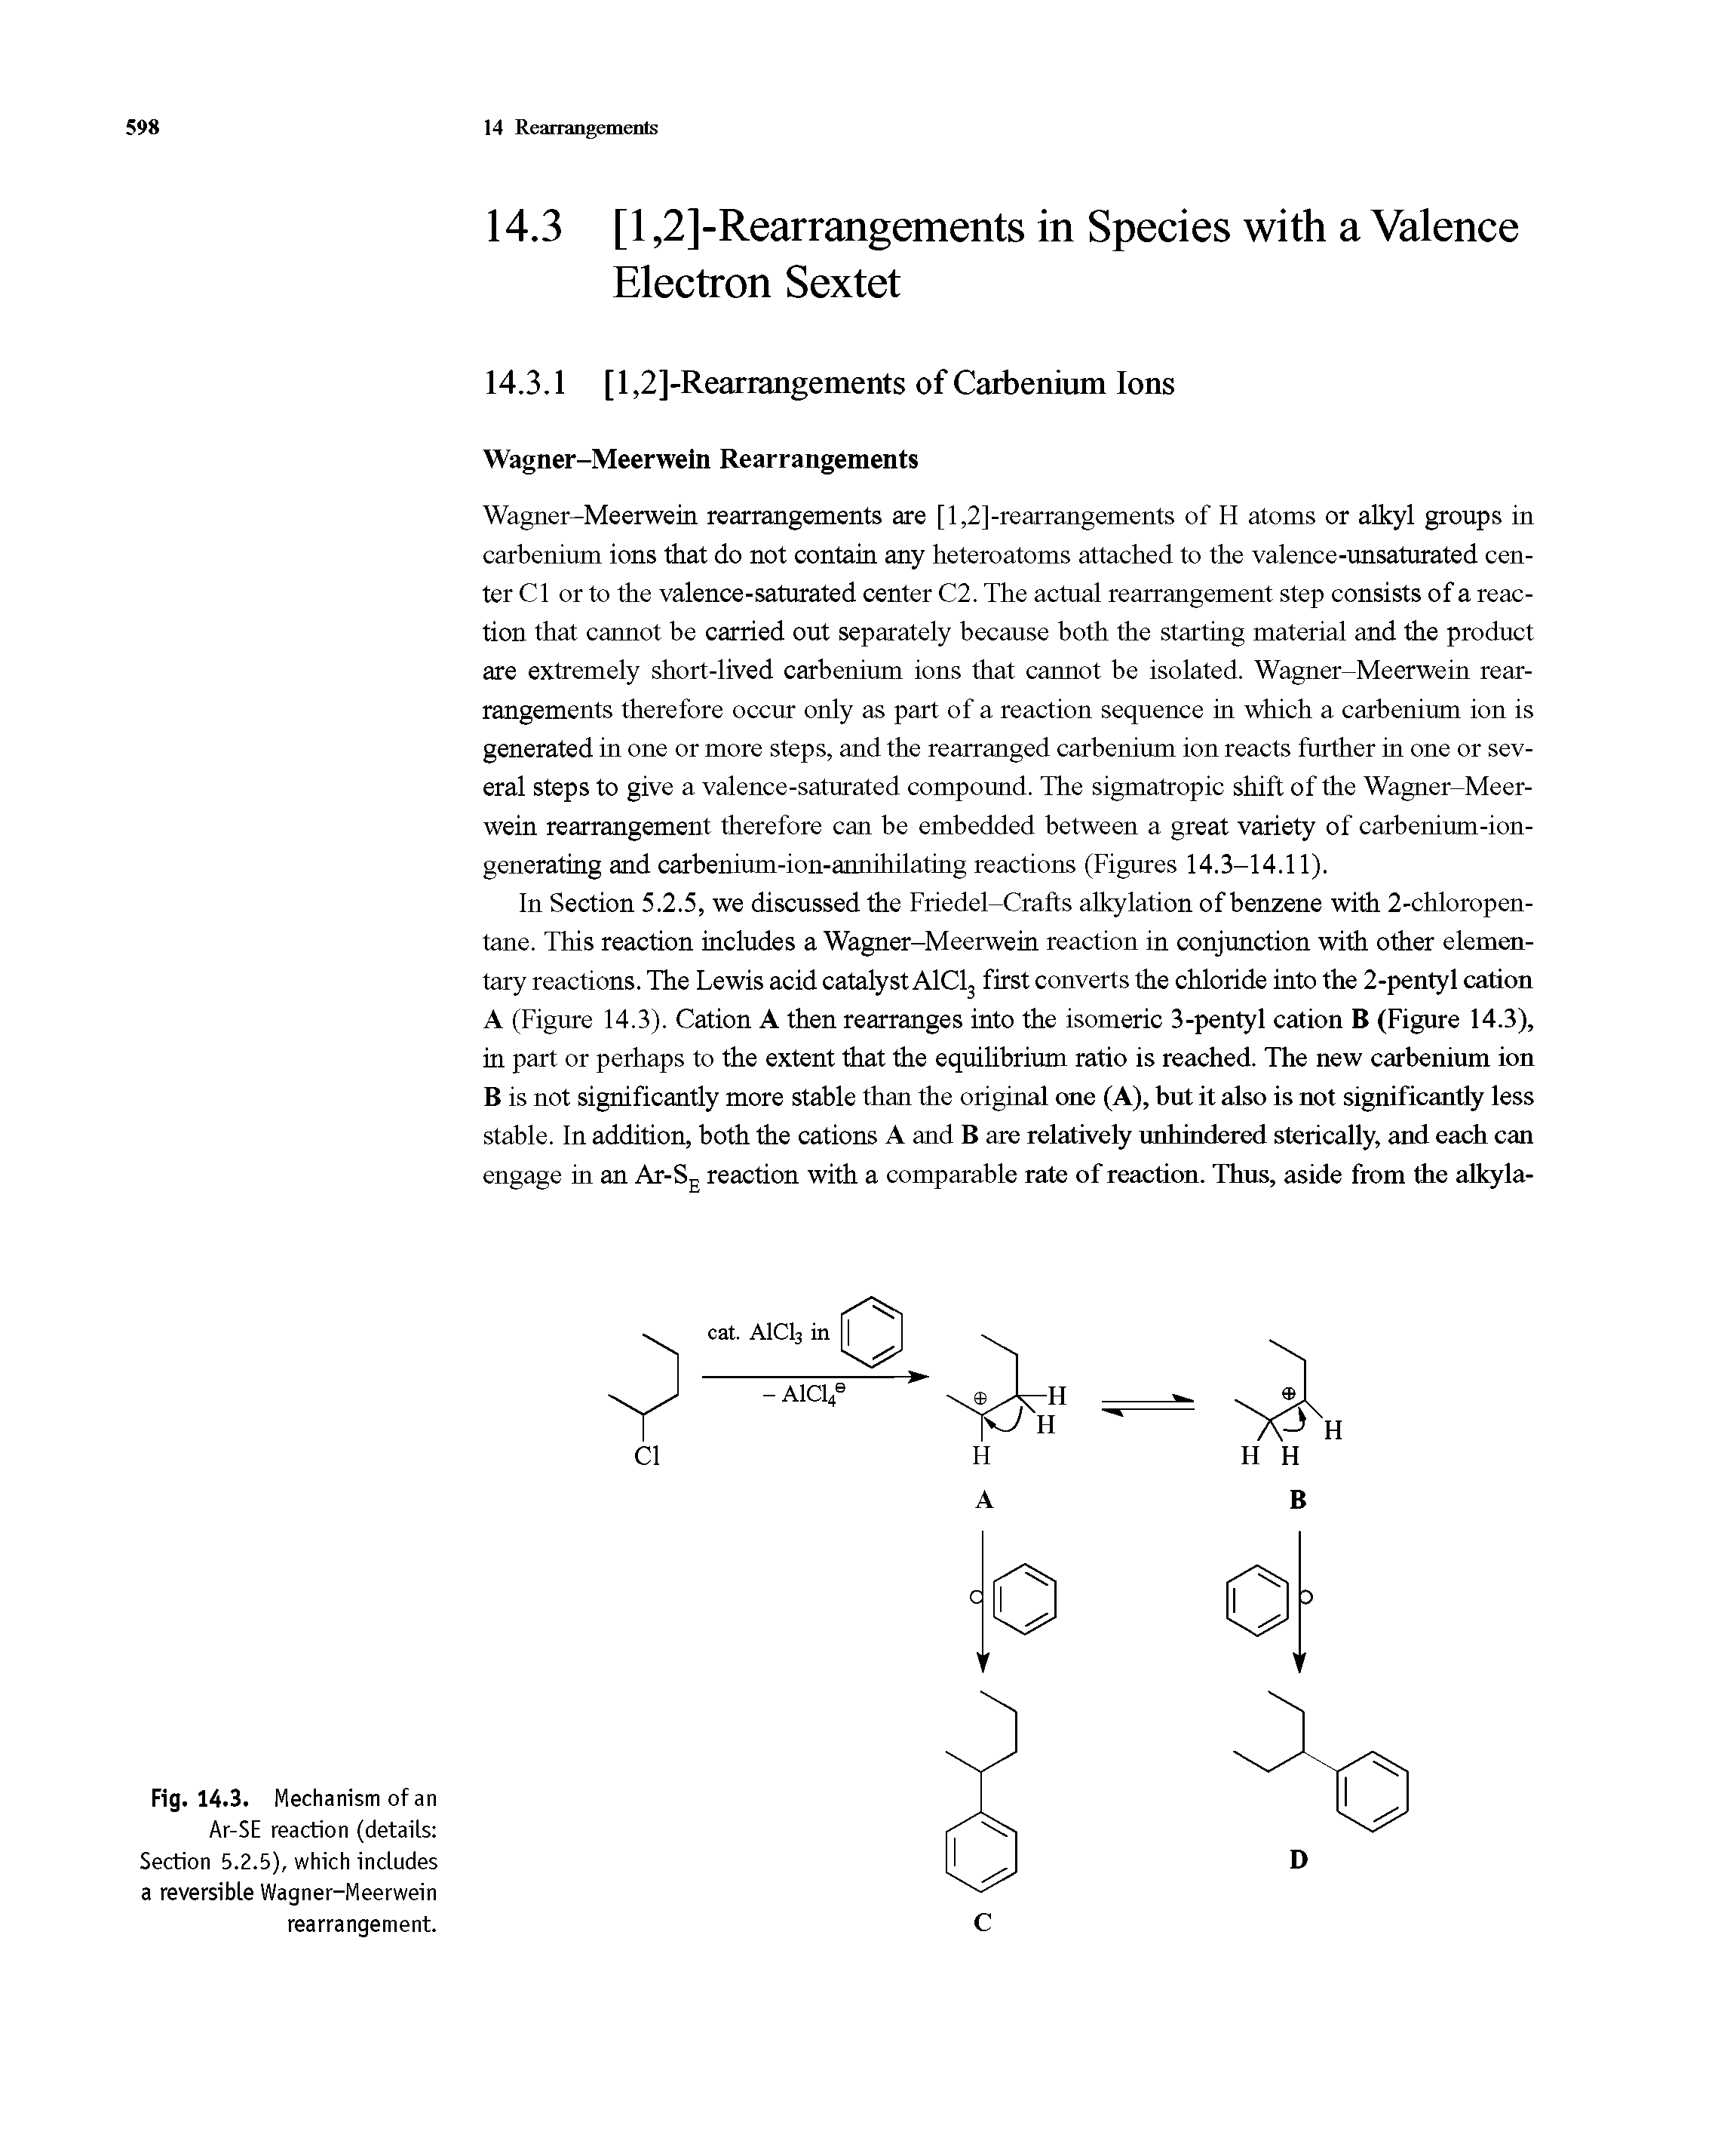 Fig. 14.3. Mechanism of an Ar-SE reaction (details Section 5.2.5), which includes a reversible Wagner-Meerwein rearrangement.